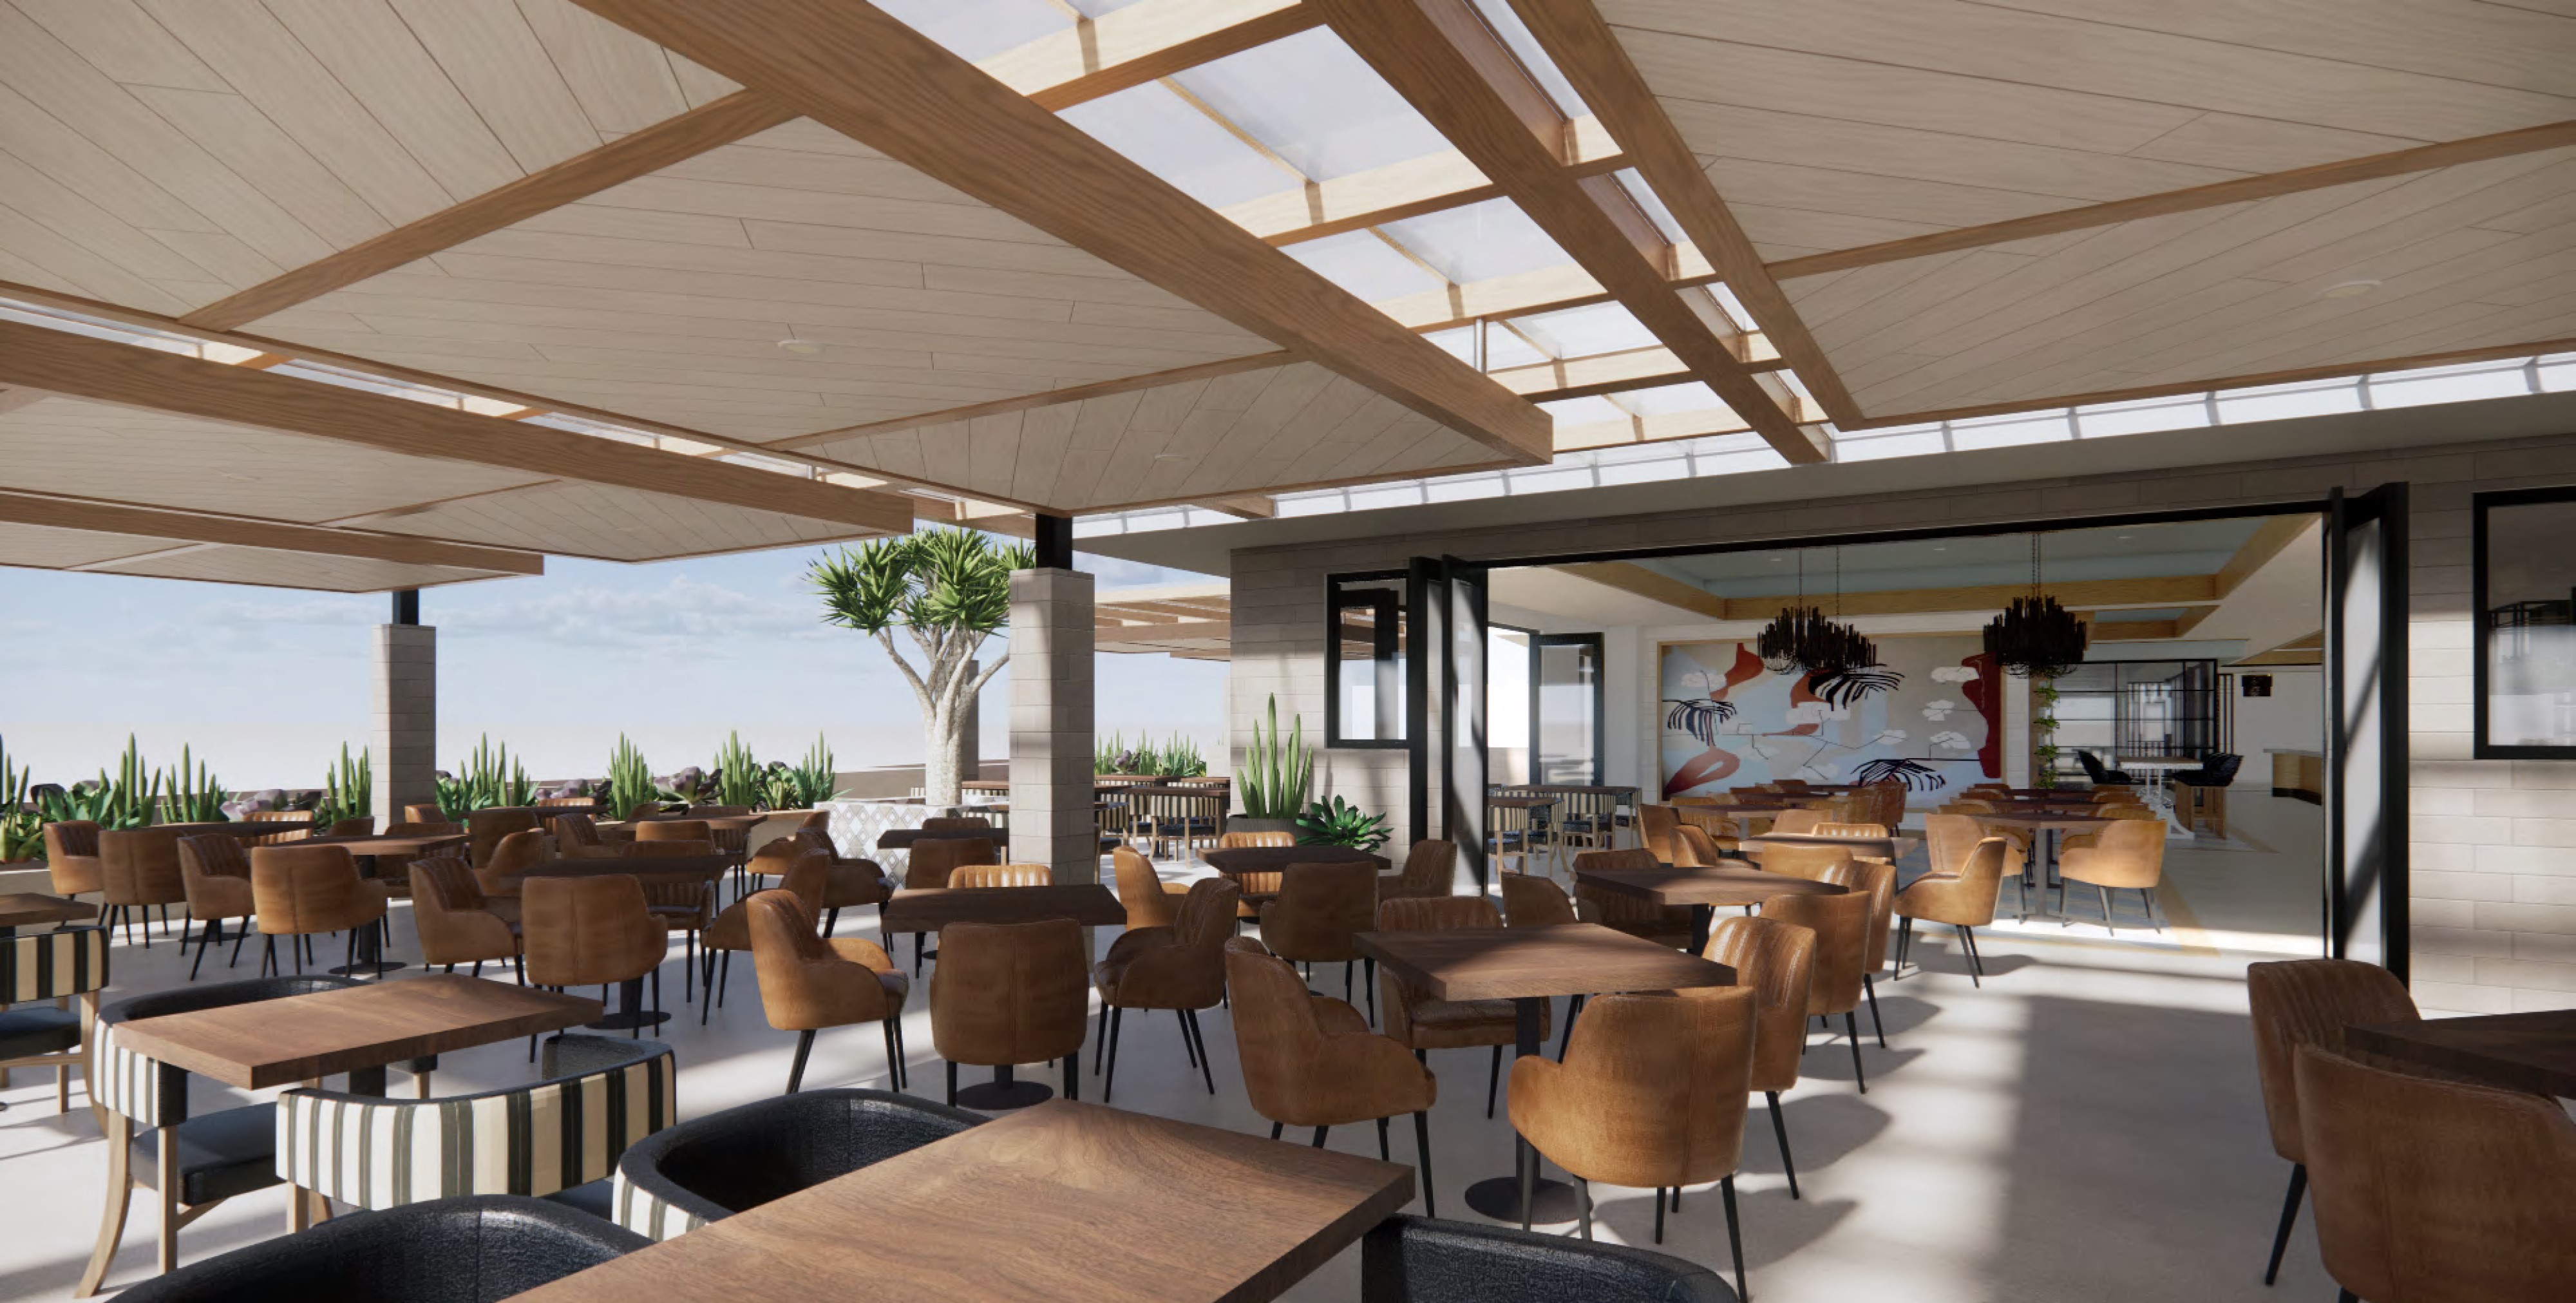 Modern restaurant interior with wooden tables and chairs, large skylights, green plants, and an open layout leading to an adjacent room with bar seating and open-air patio.